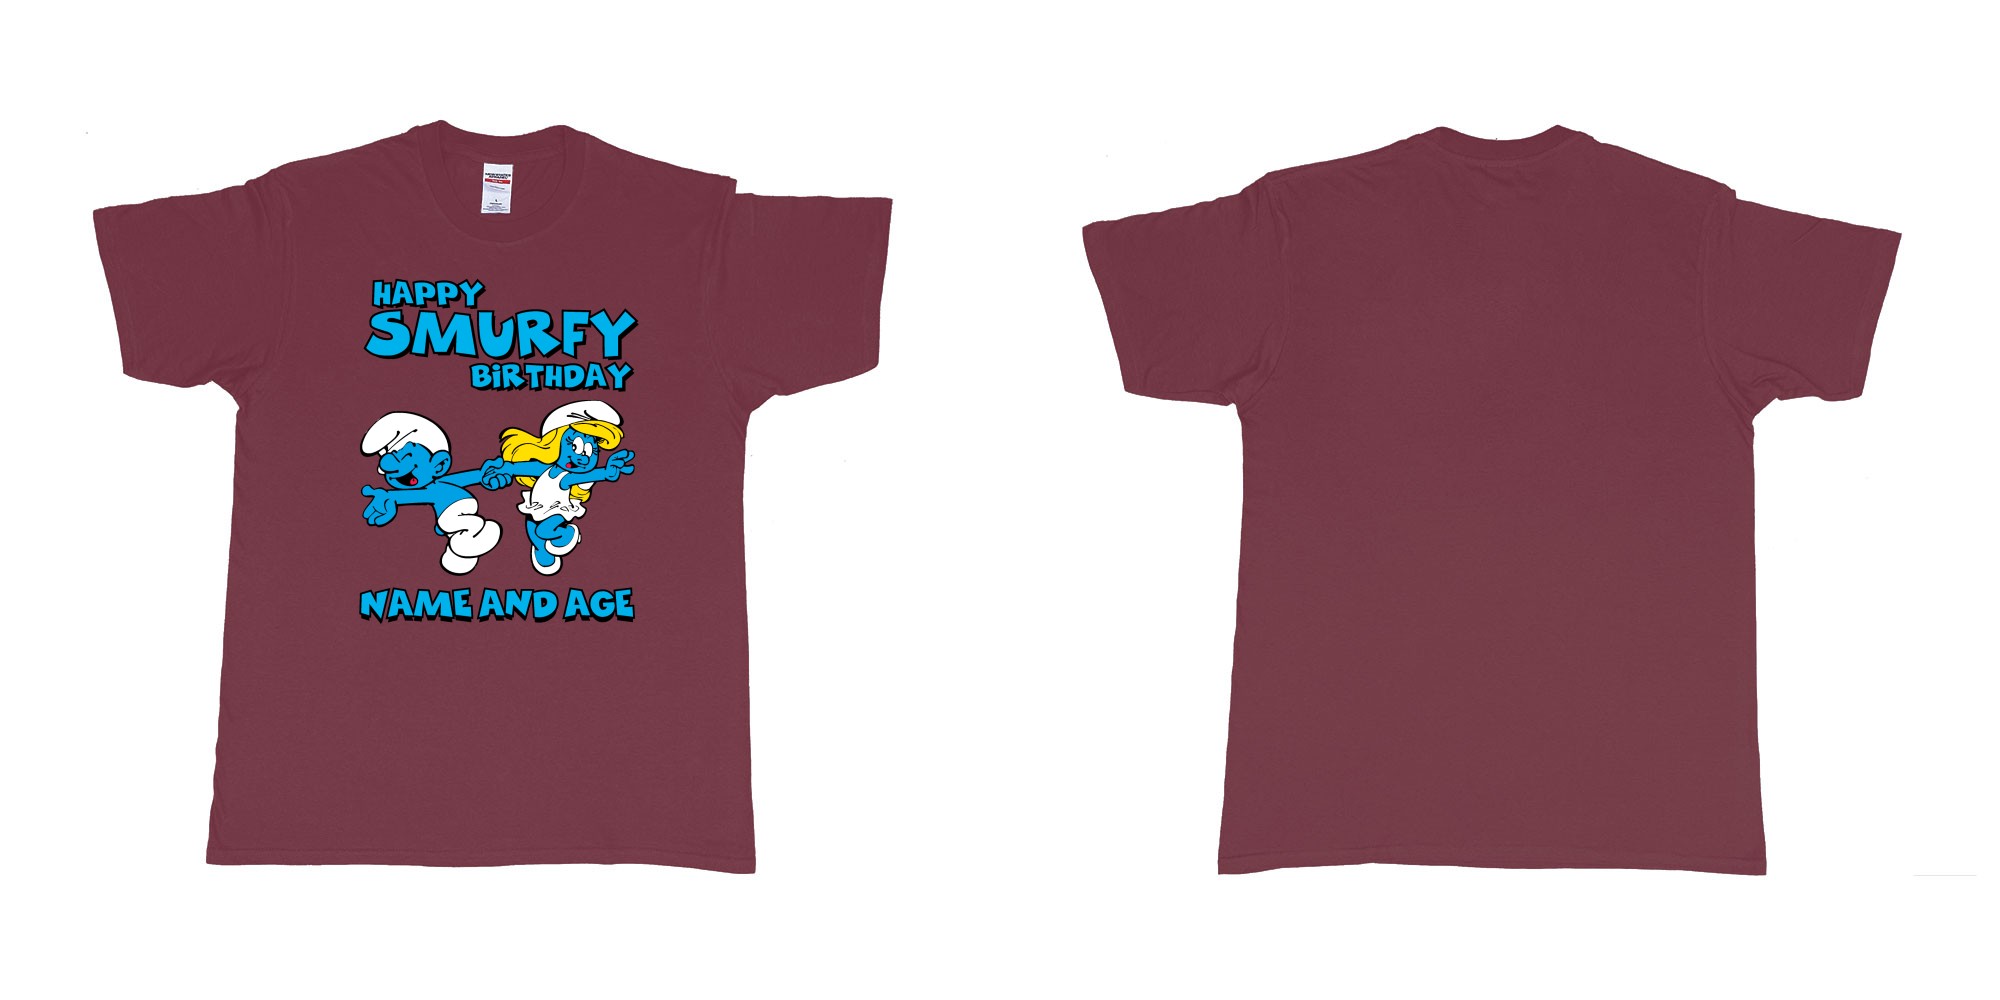 Custom tshirt design happy smurfy birthday in fabric color marron choice your own text made in Bali by The Pirate Way